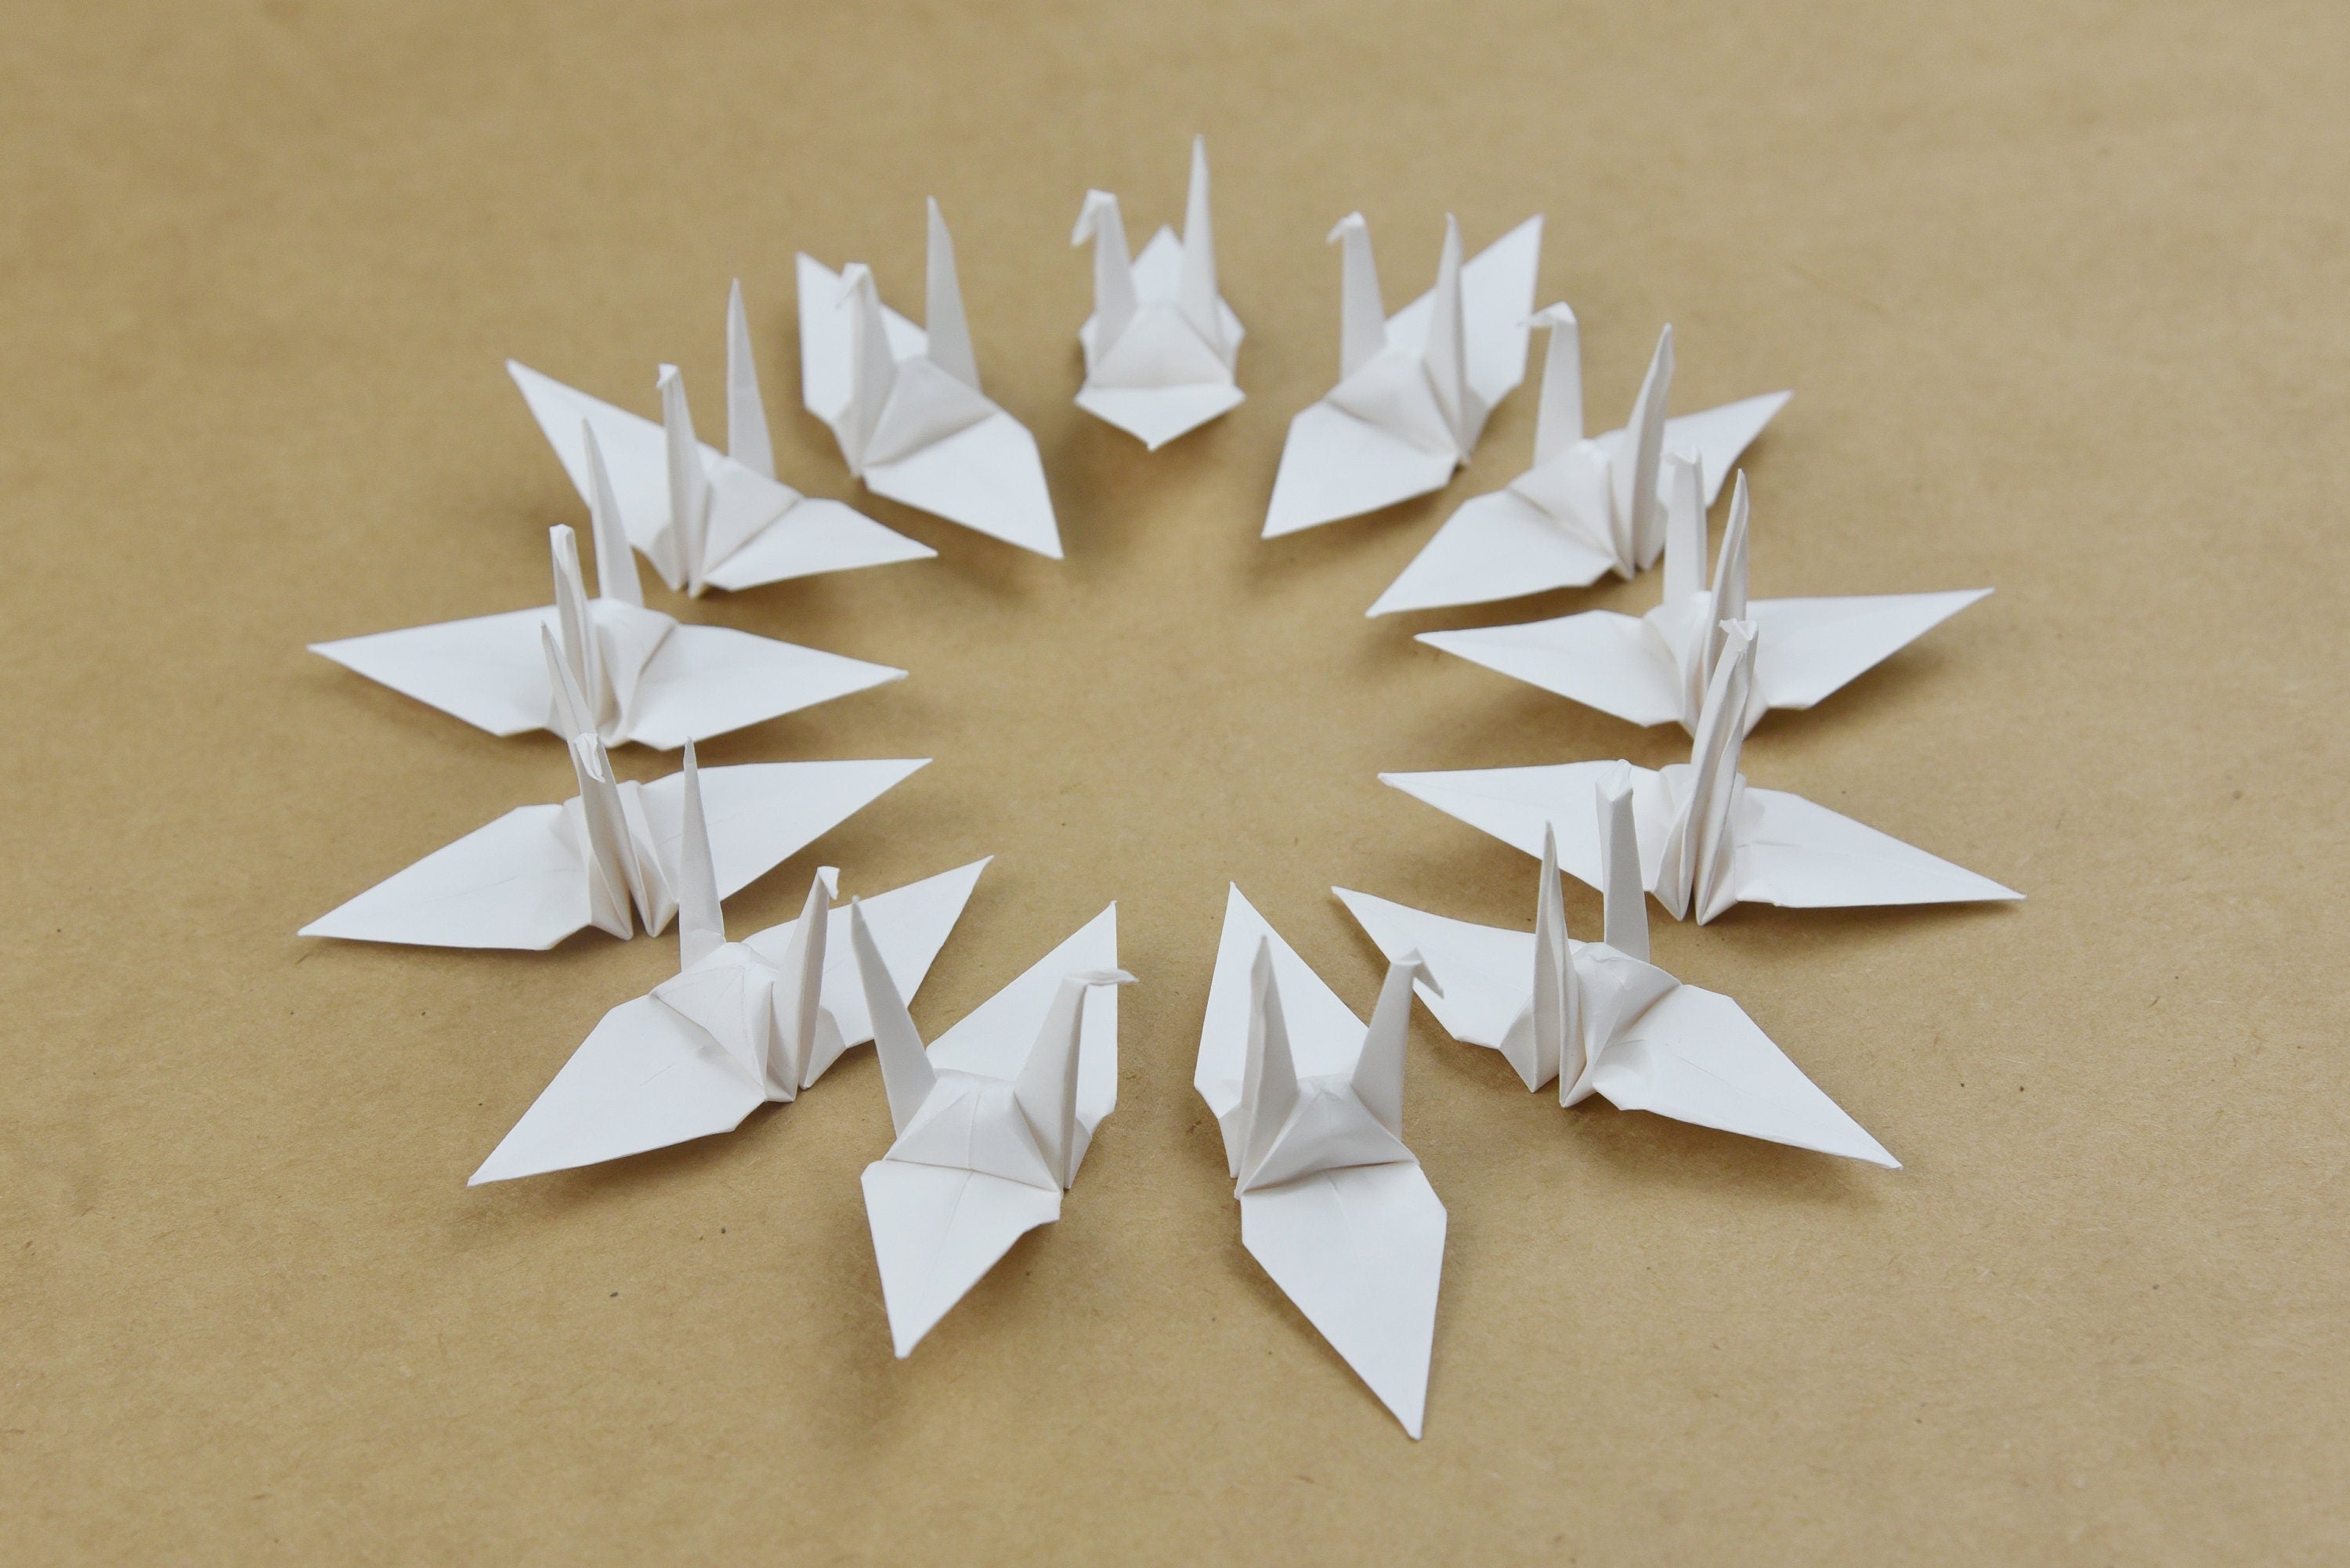 100 Ivory Origami Paper Crane Finished 3x3 inch (7.5 cm) for Christmas Wedding Decoration